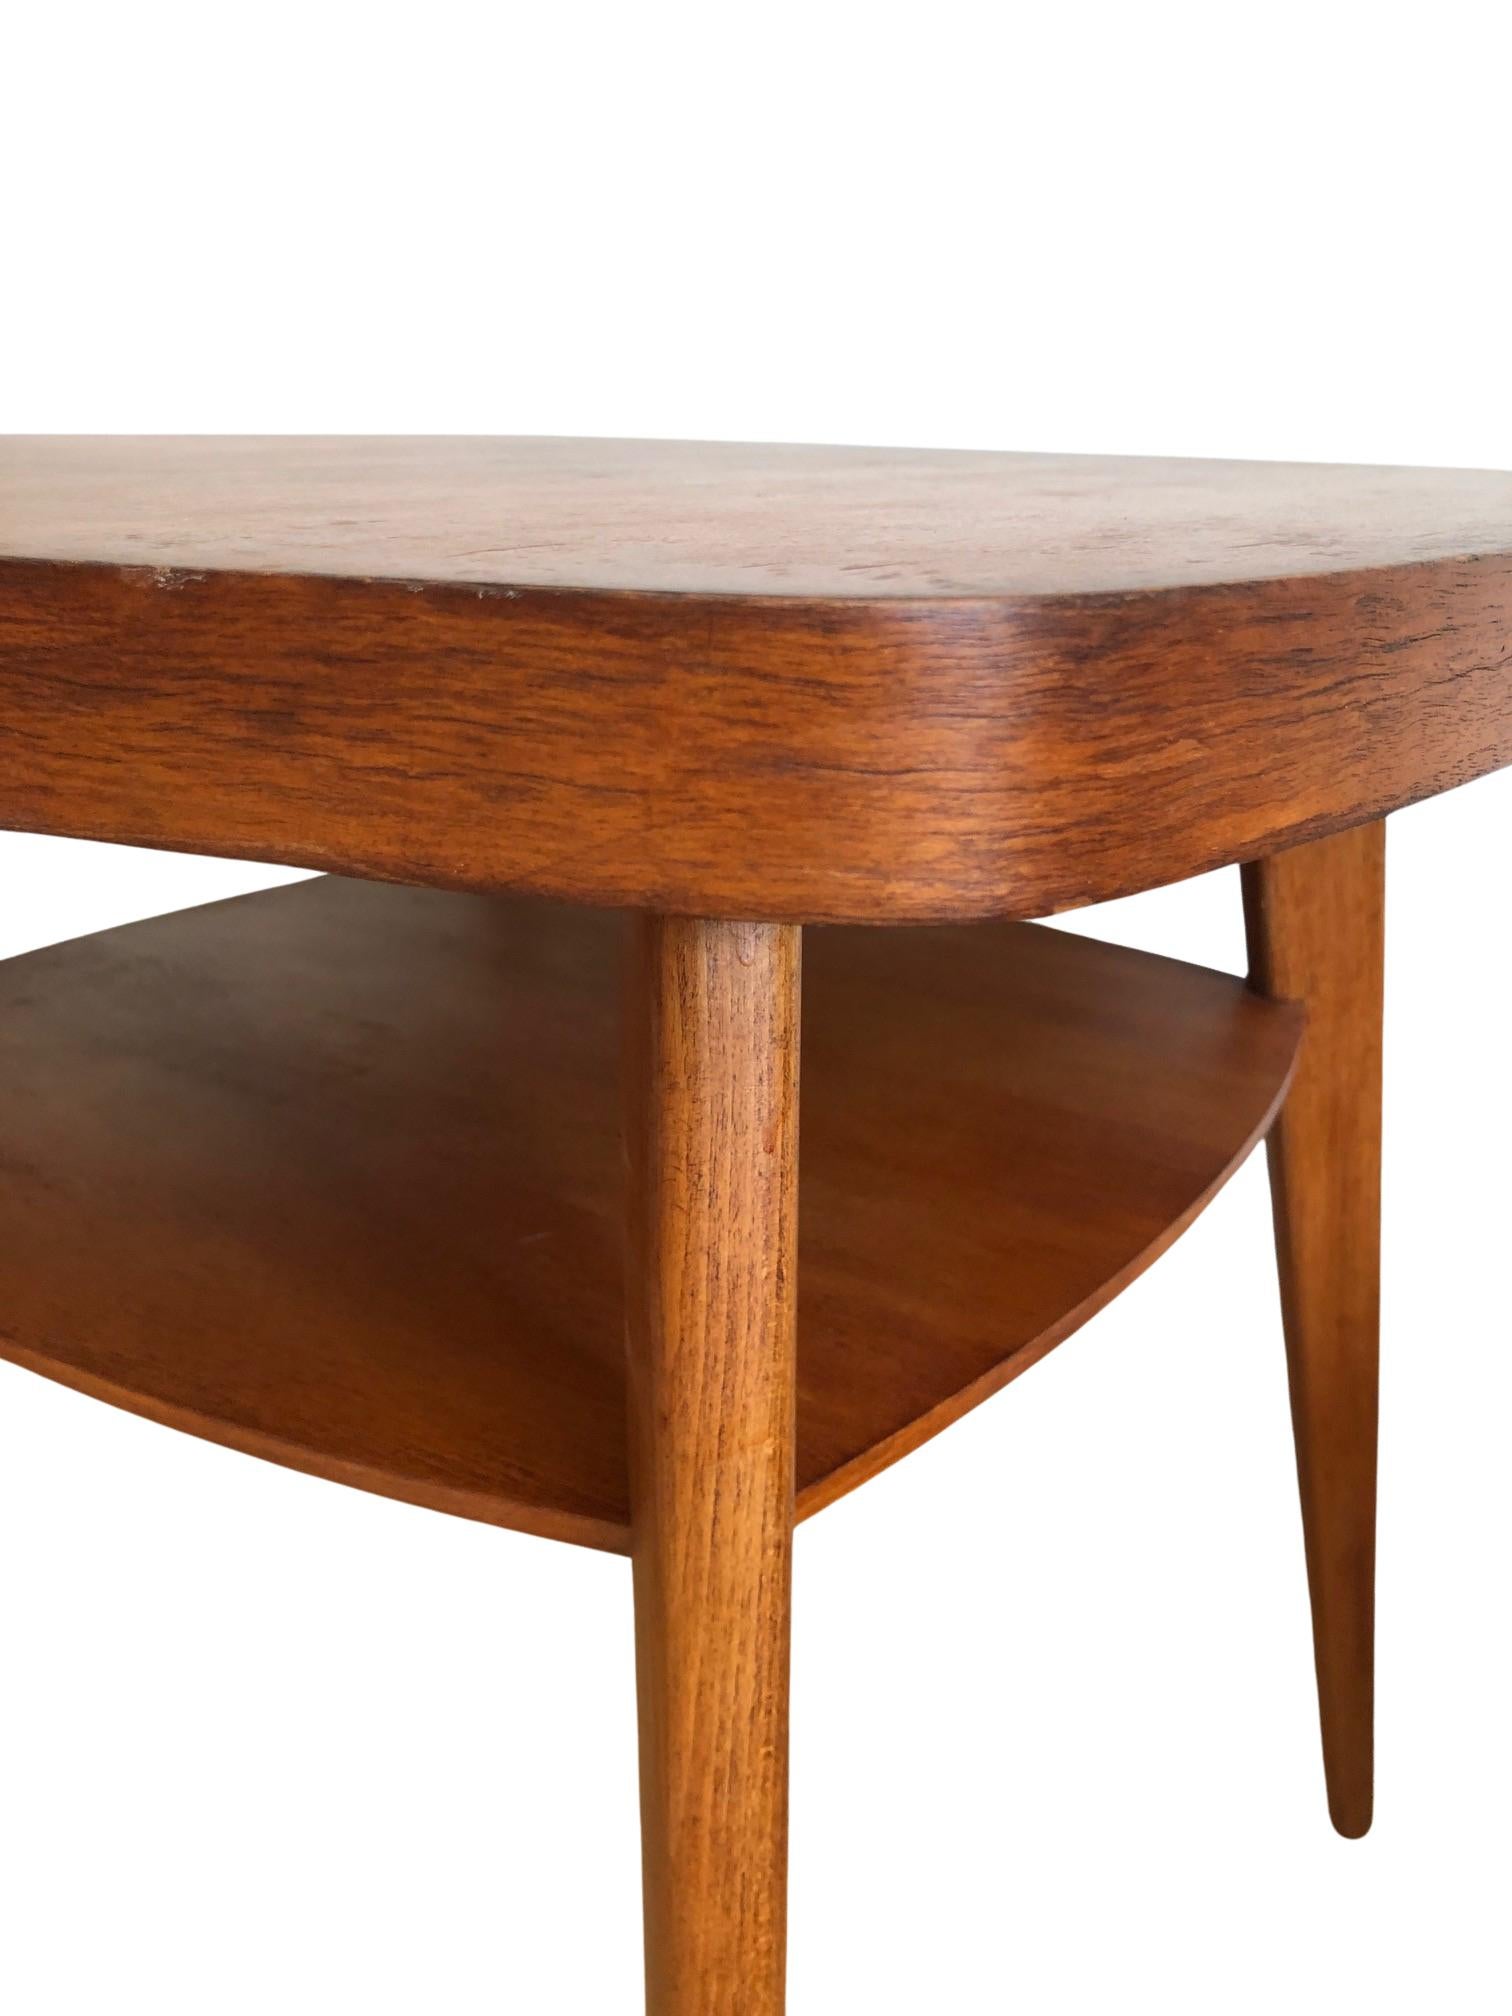 Mid-Century Wooden Coffee Table, Europe, 1960s For Sale 1